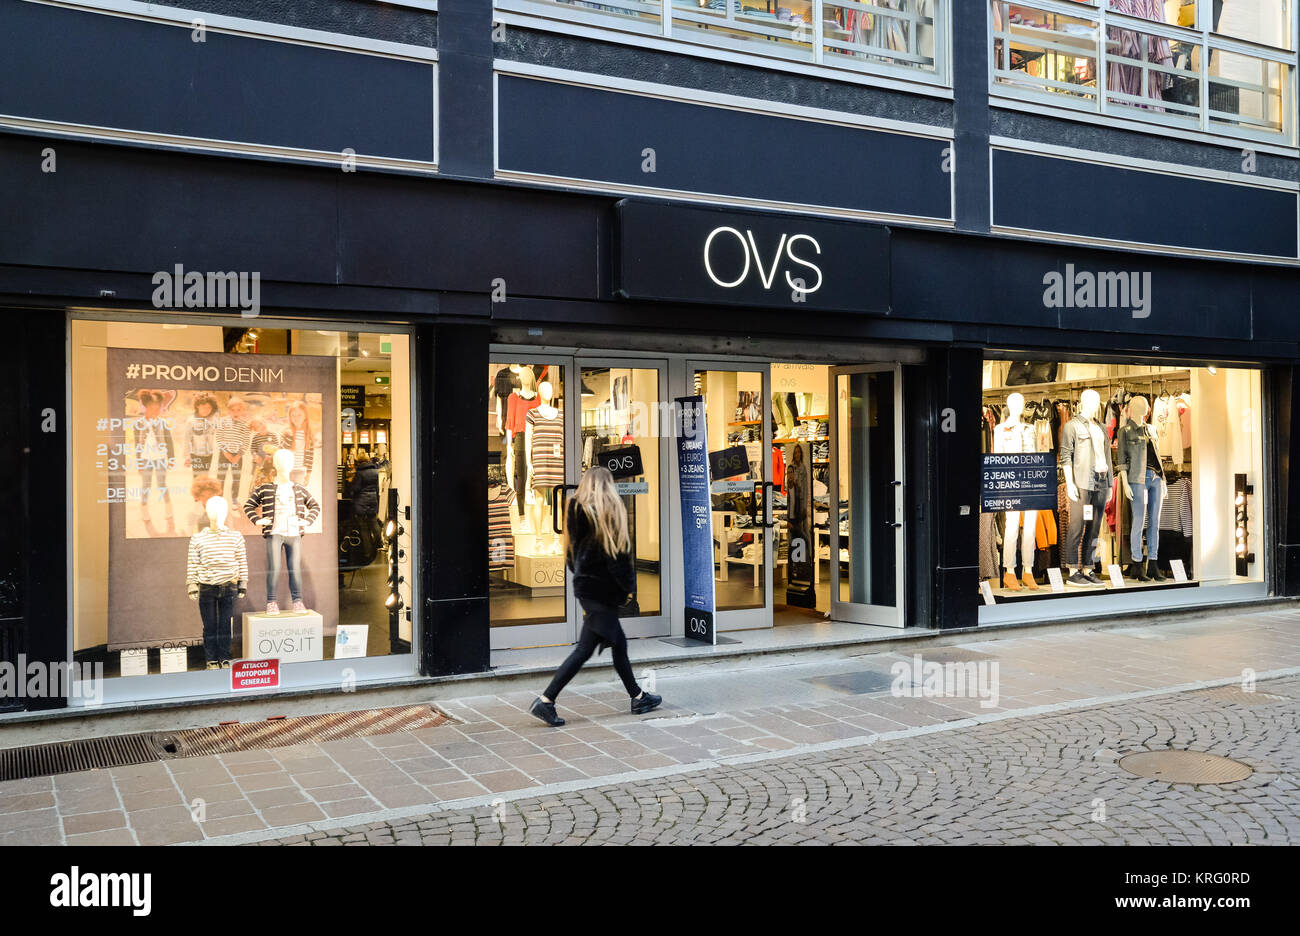 Ovs shop High Resolution Stock Photography and Images - Alamy